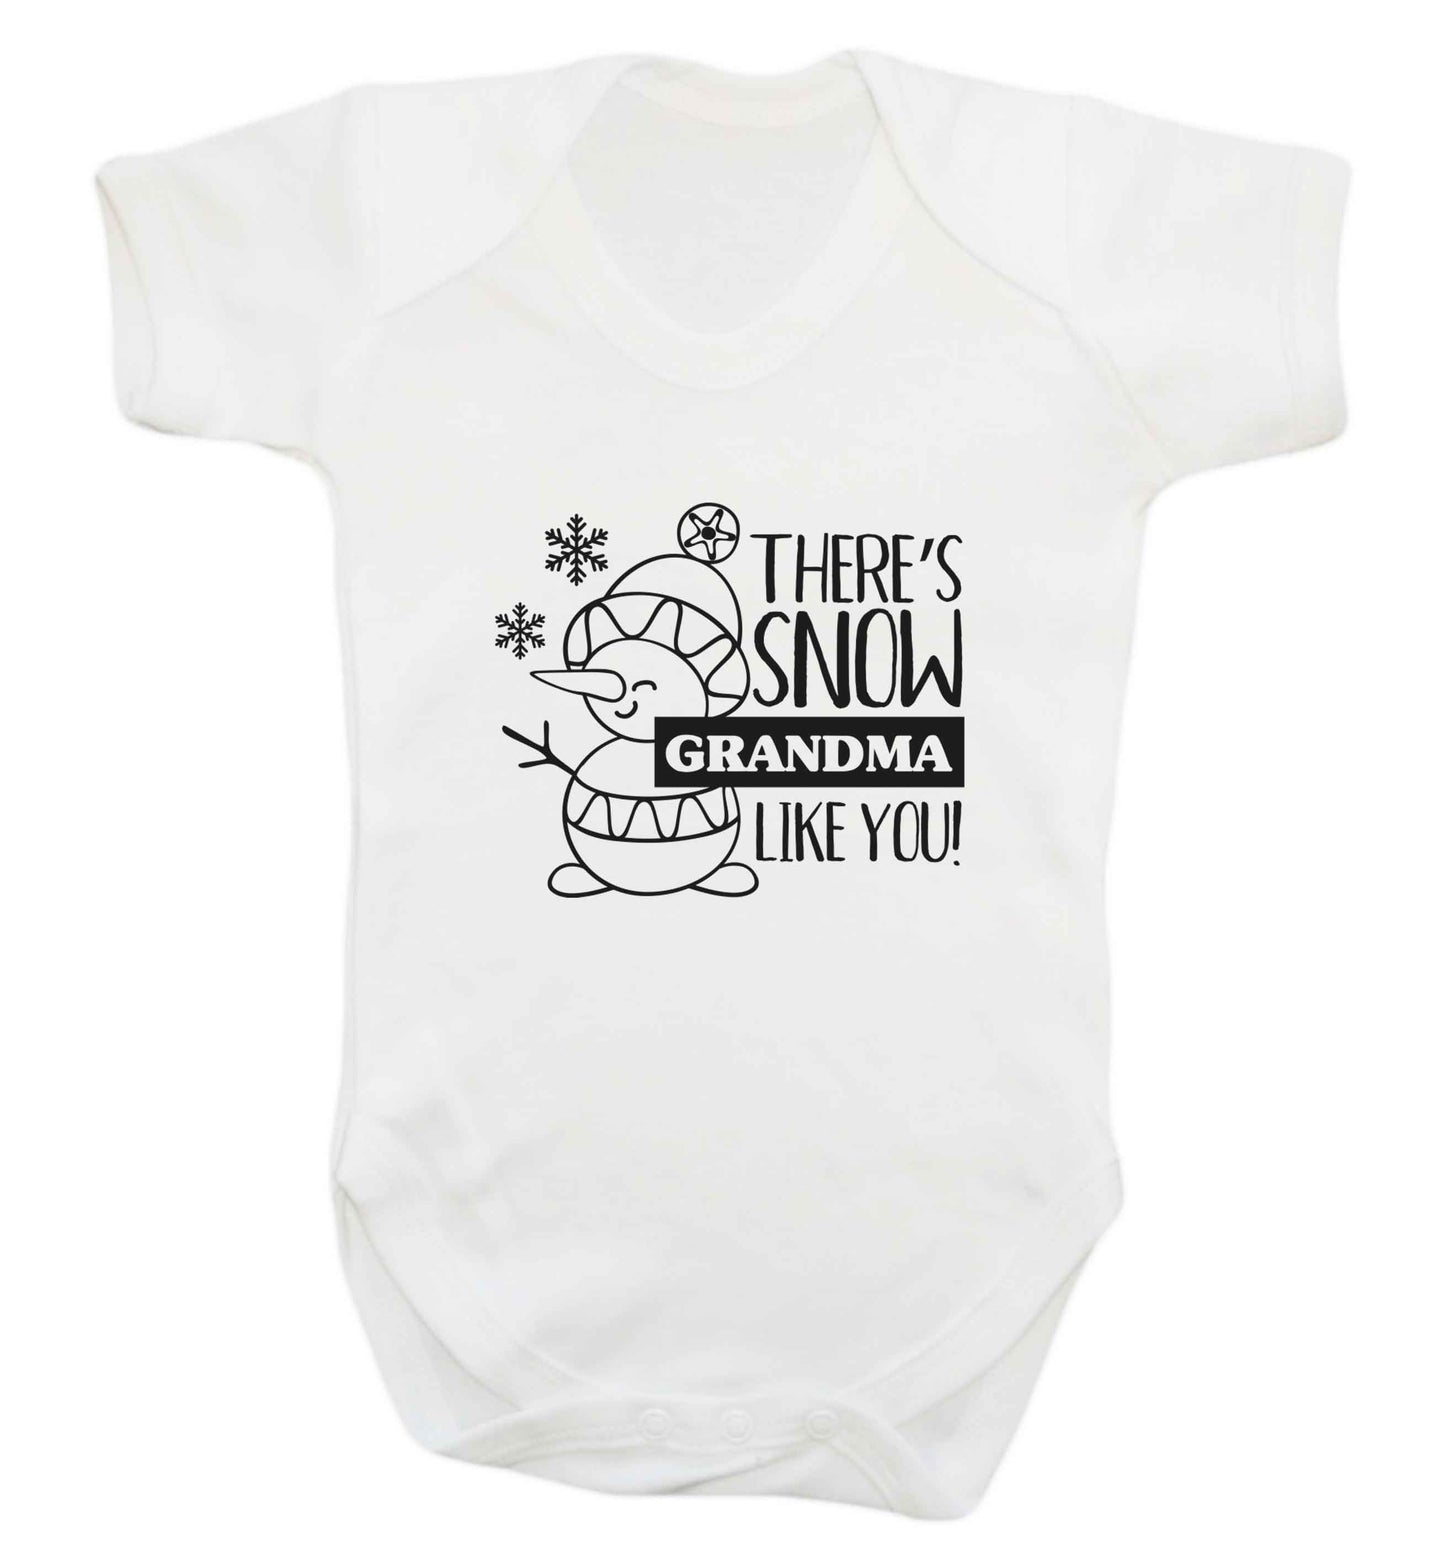 There's snow grandma like you baby vest white 18-24 months